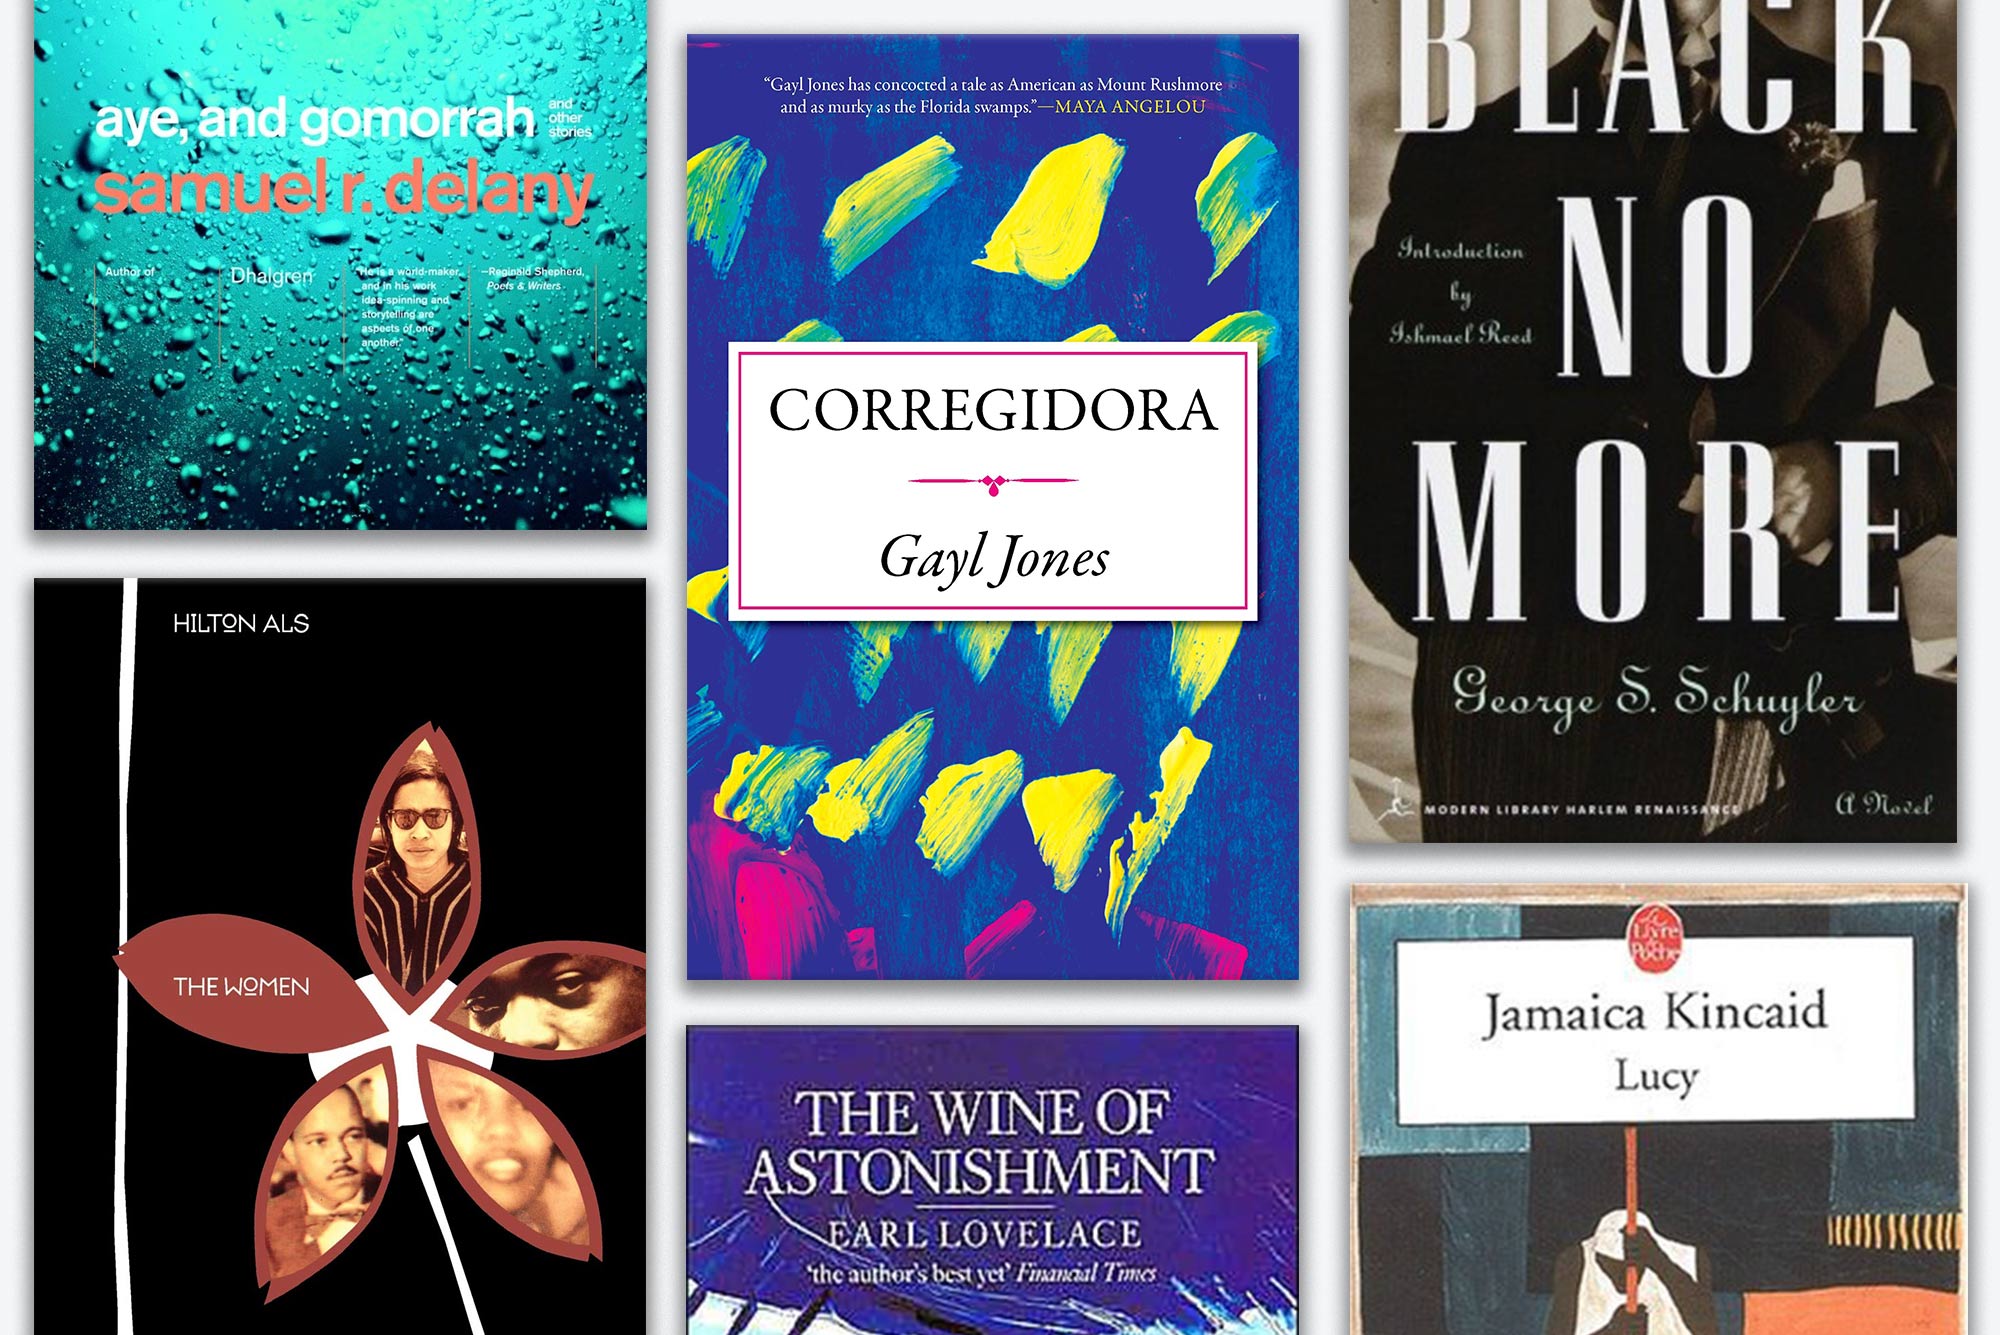 Composite image of book covers of the following books: Lucy, by Jamaica Kincaid (1990), Aye, and Gomorrah, by Samuel R. Delany (1967), The Women, by Hilton Als (1996), Black No More, George S. Schuyler (1931), The Wine of Astonishment, by Earl Lovelace (1982, Corregidora, by Gayl Jones (1975)